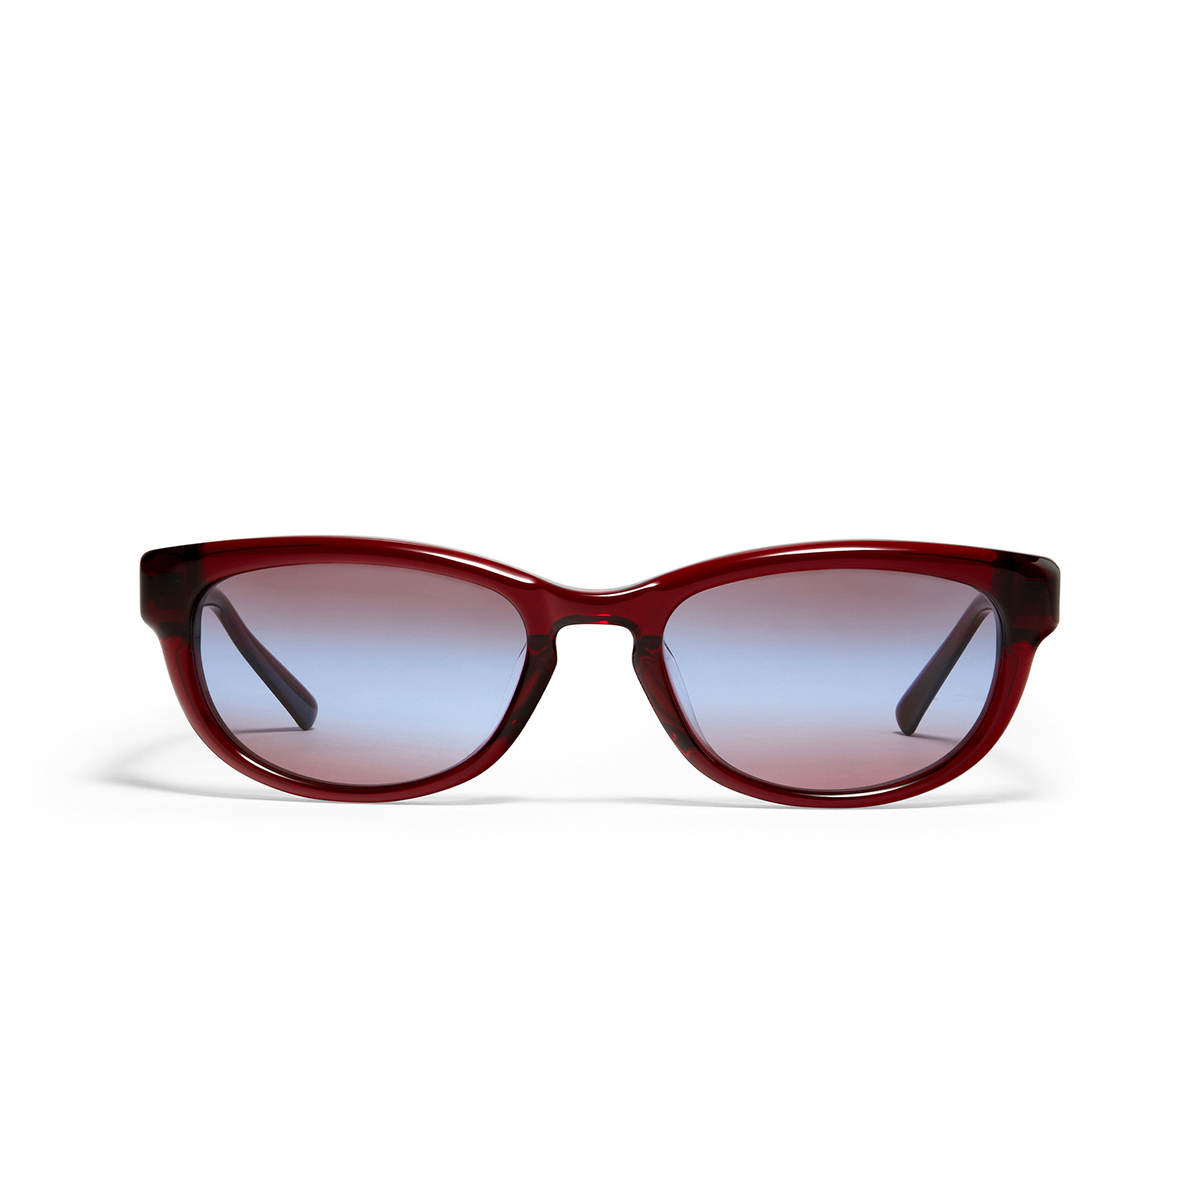 Gentle Monster® Cat-eye Sunglasses: Reny color Red RC2 - front view.